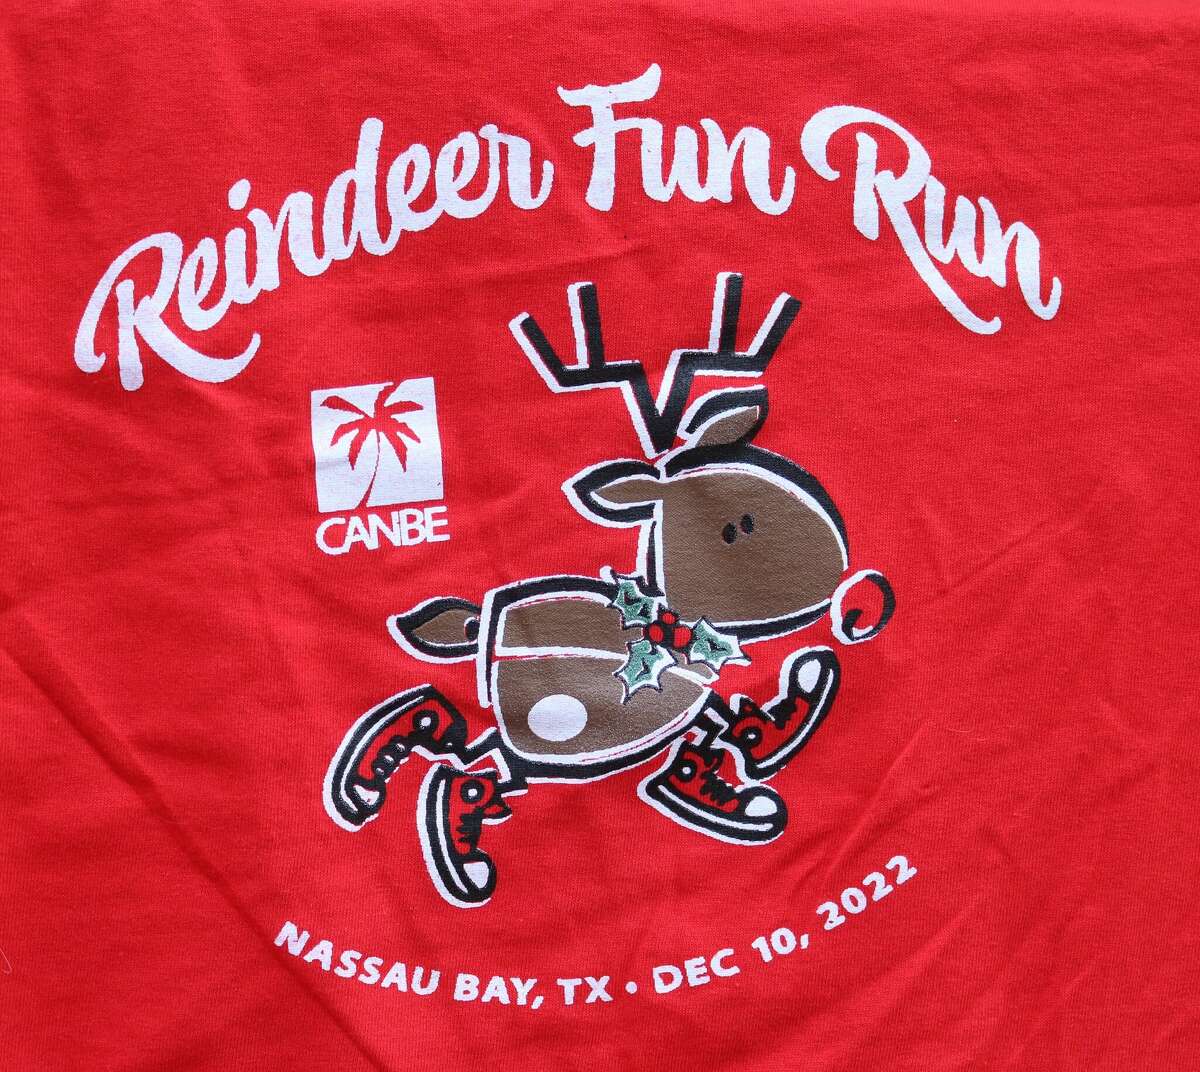 The streets of Nassau Bay were again the host of a 5K race or 3.1 miles. On Saturday, it was the annual Reindeer Fun Run where pleasant December temperatures allowed for pretty fast runs for the top 10 finishers.